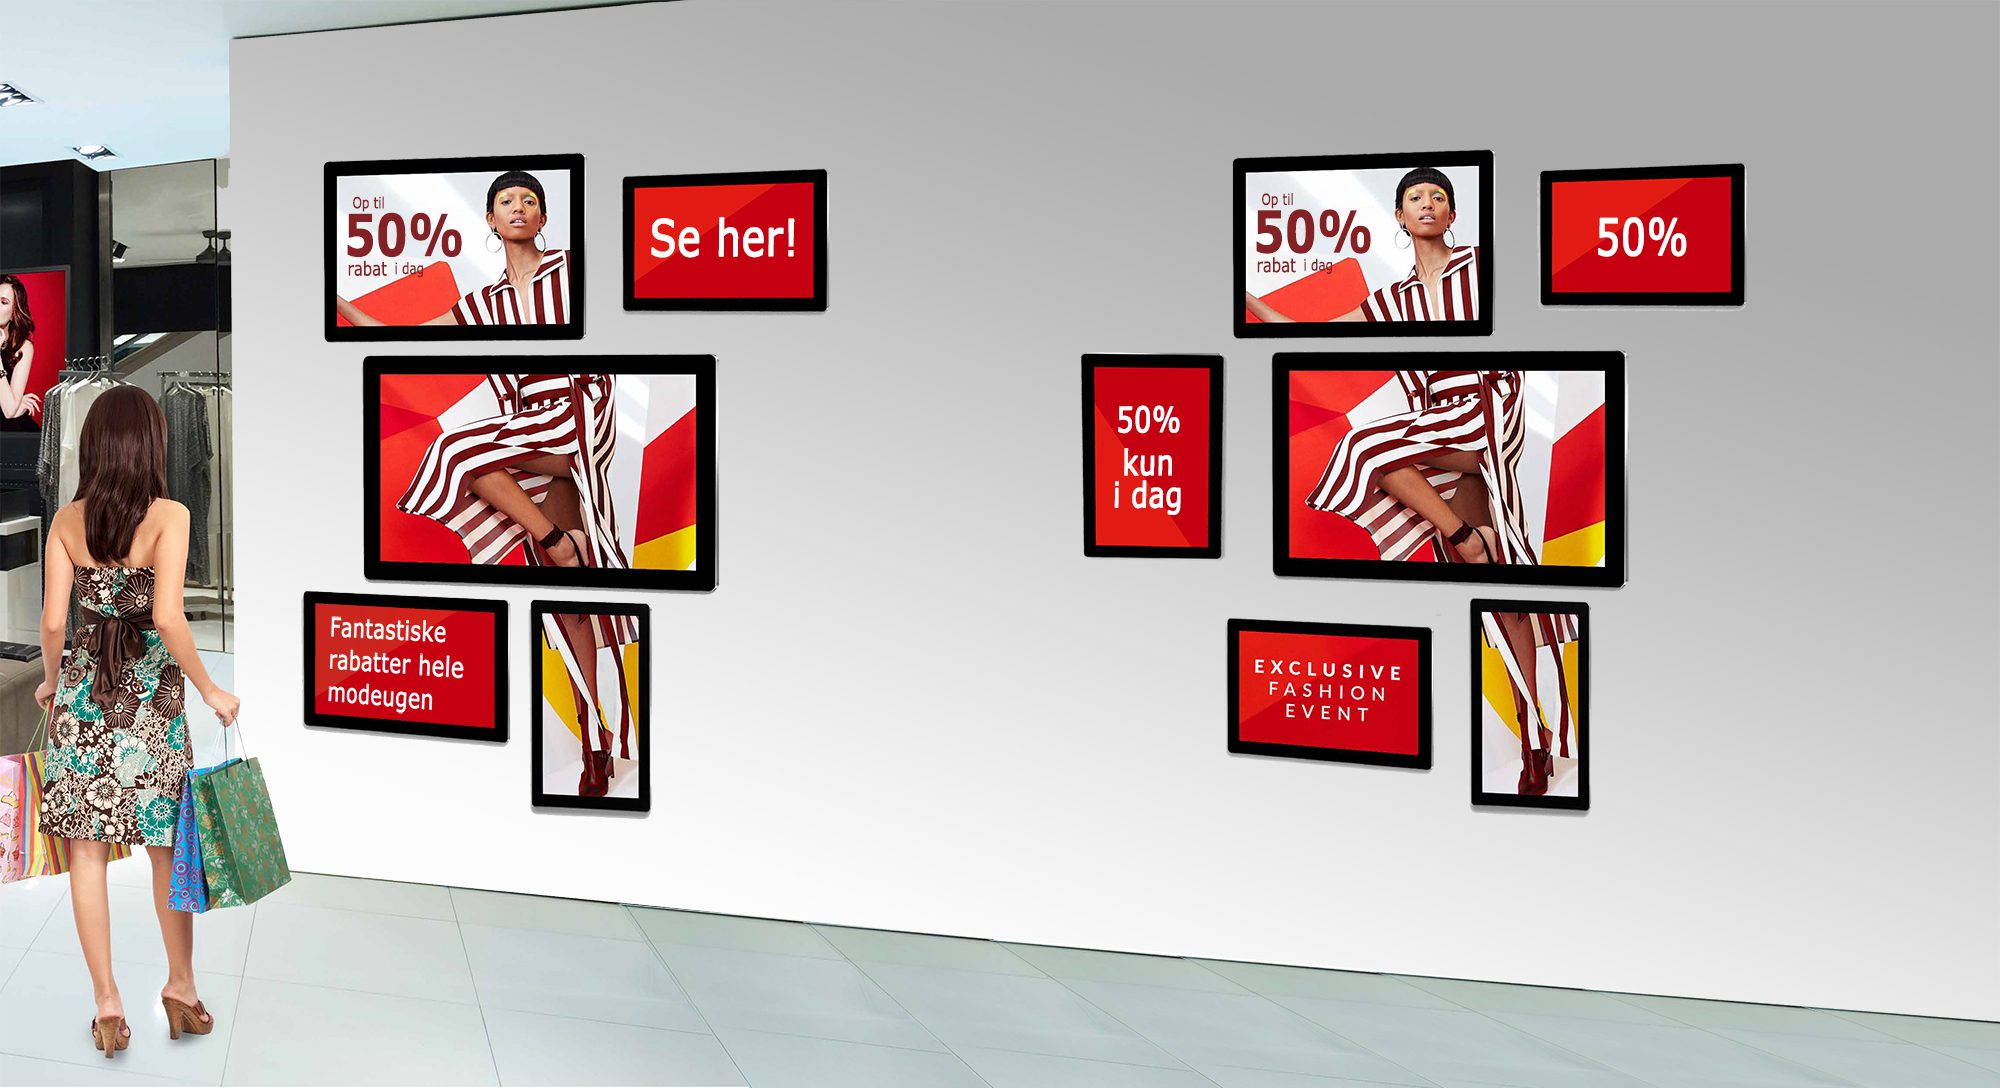 Digital signs capture, on average, more than 400% more views than static signs. This is just one of the benefits of digital signage. Read about more benefits here.